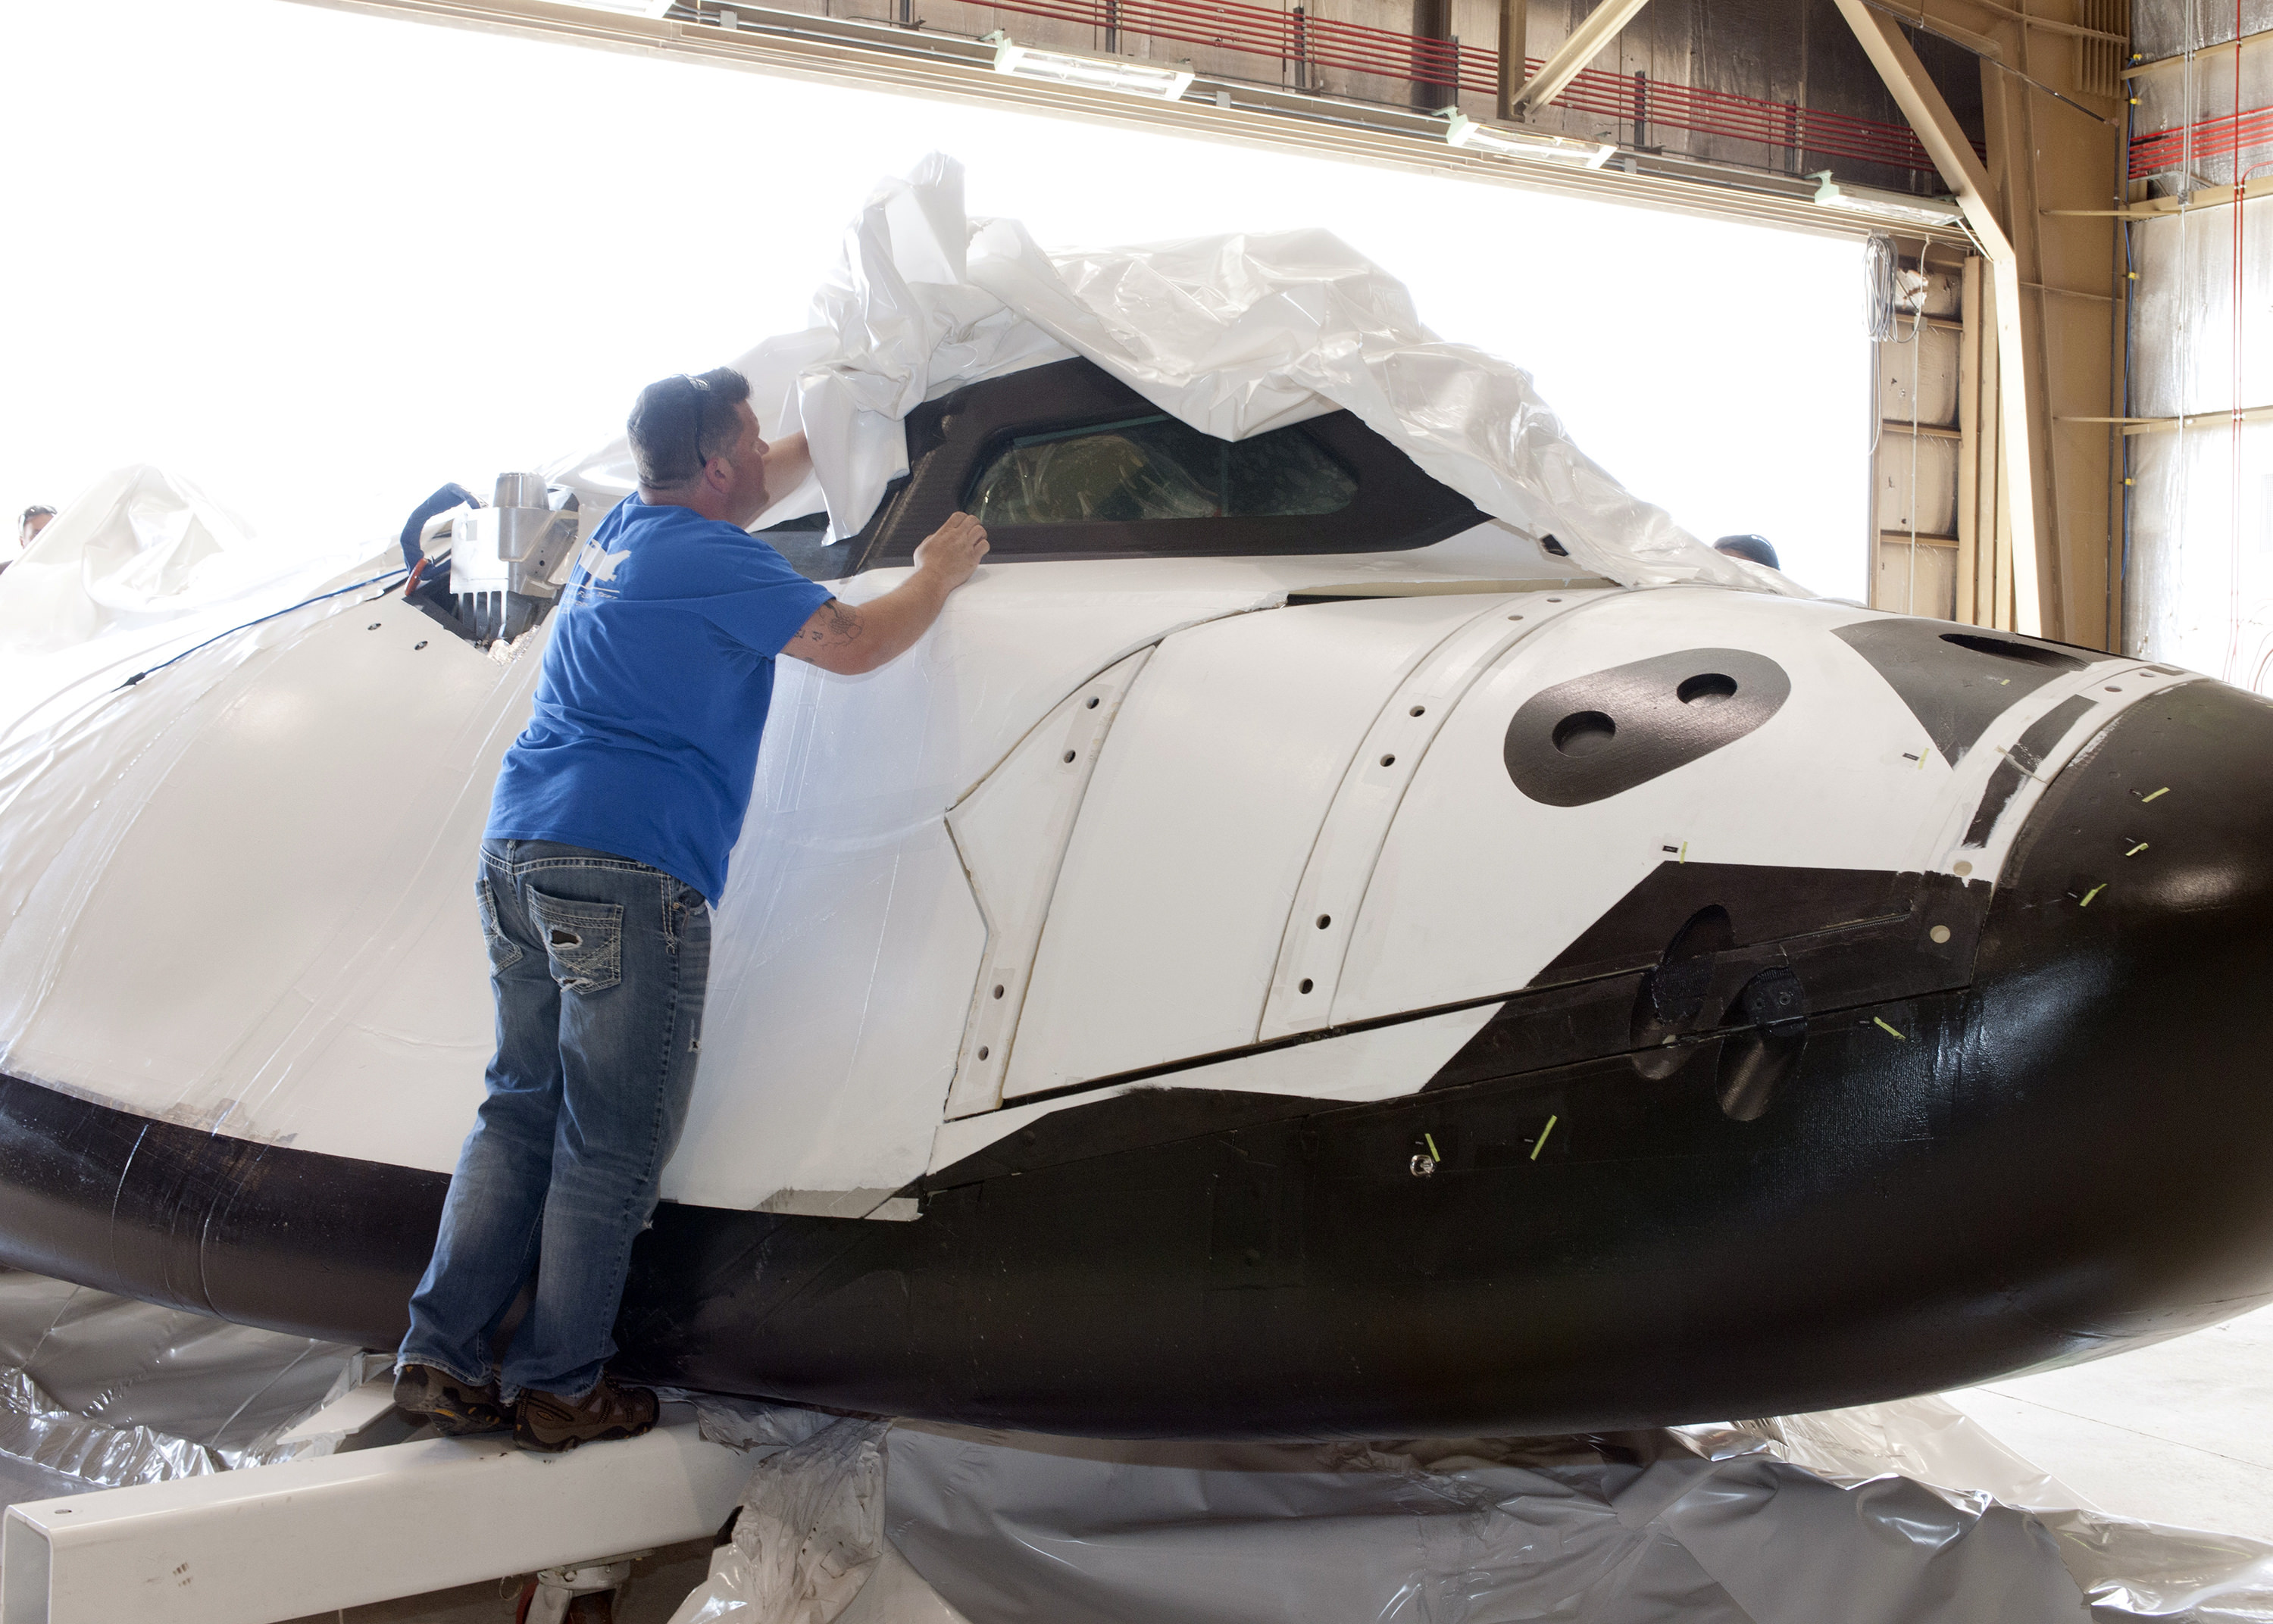 Dream Chaser Readies, Gets Set For Flight Testing - Universe Today3000 x 2144